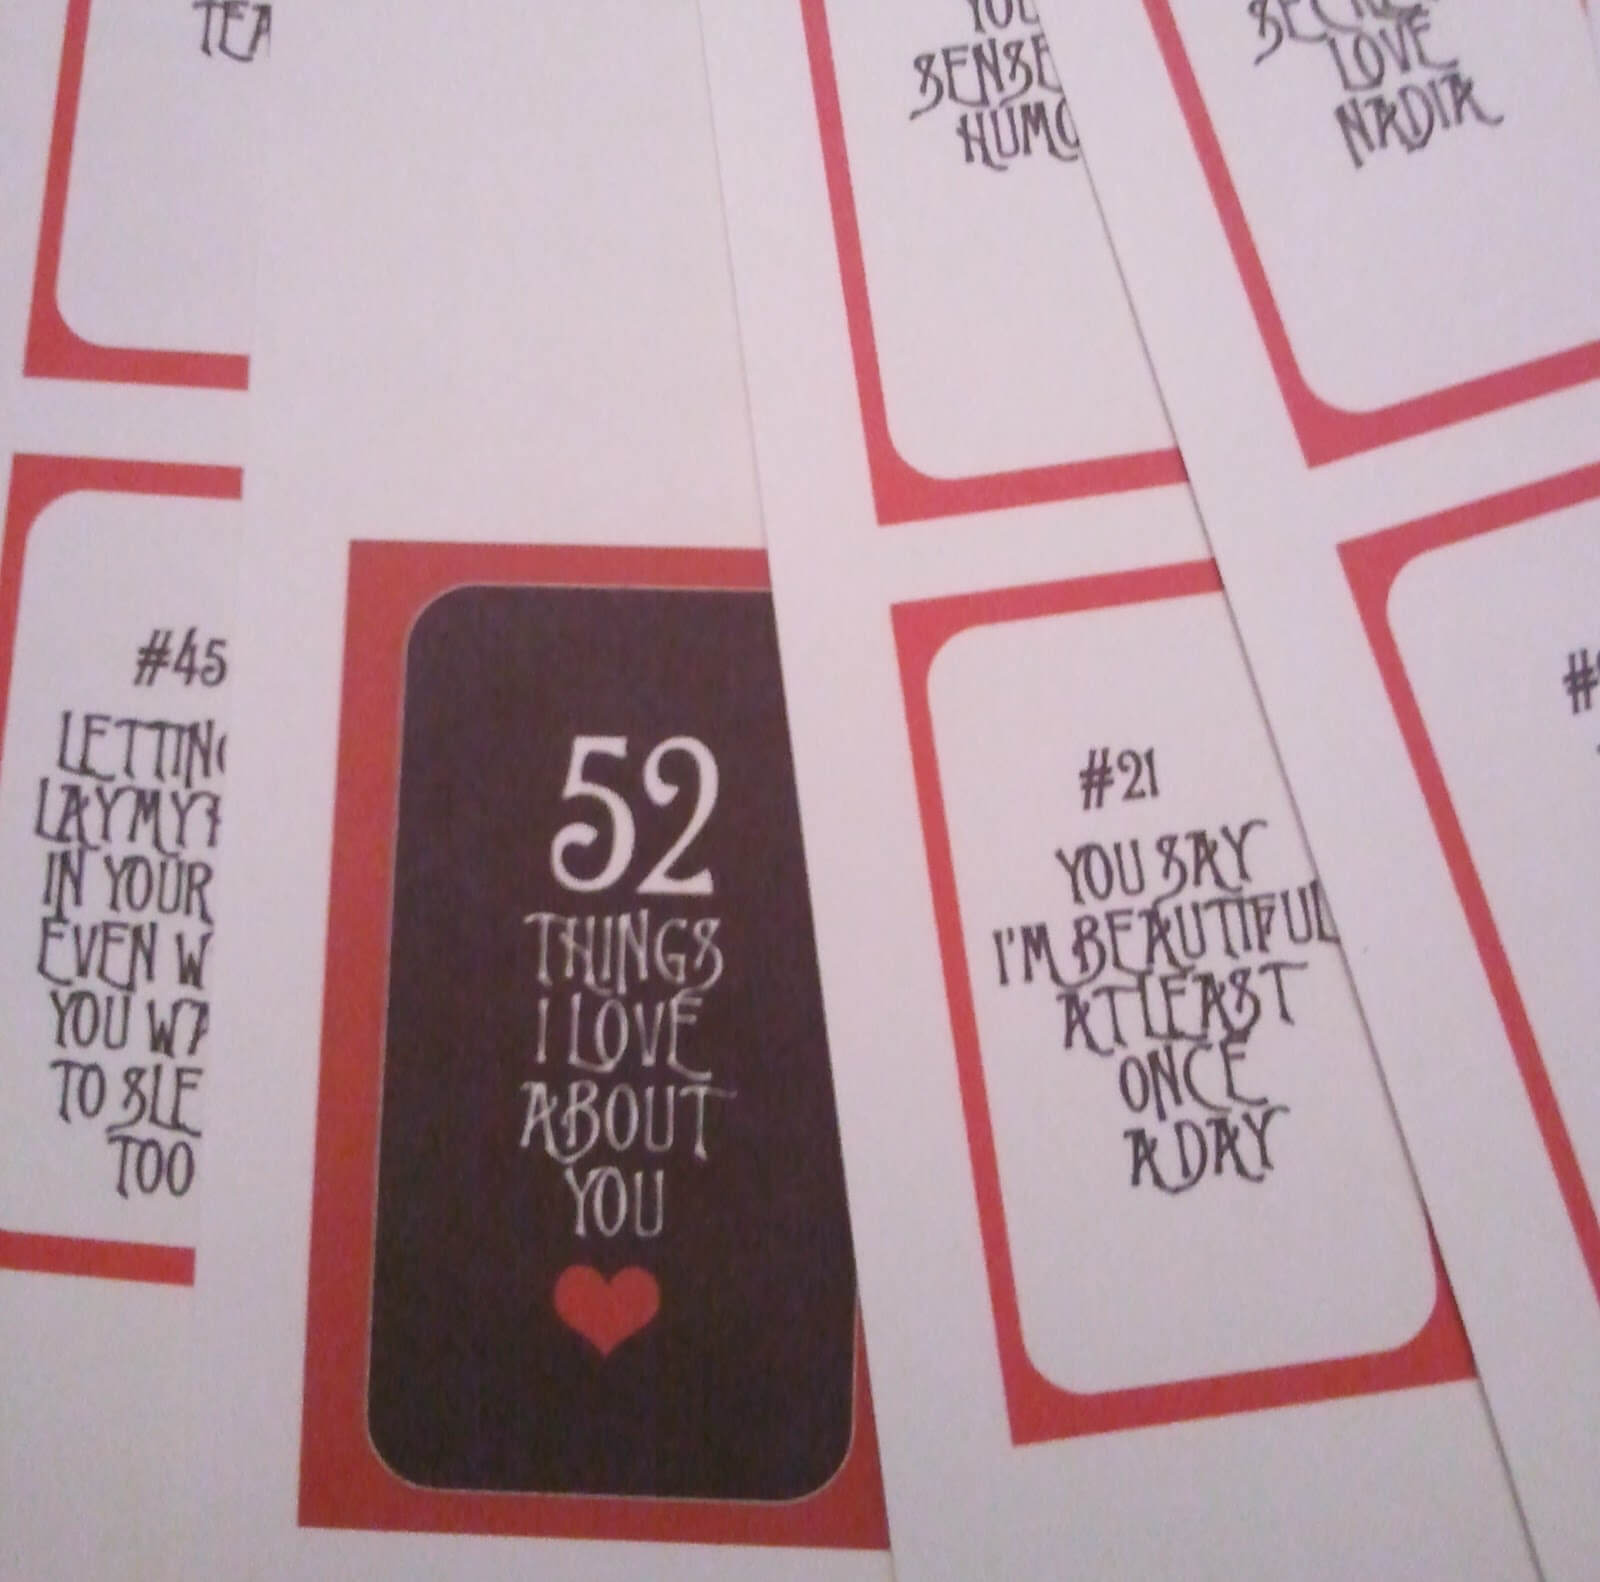 28 Images Of 52 Things Template | Vanscapital Intended For 52 Things I Love About You Cards Template